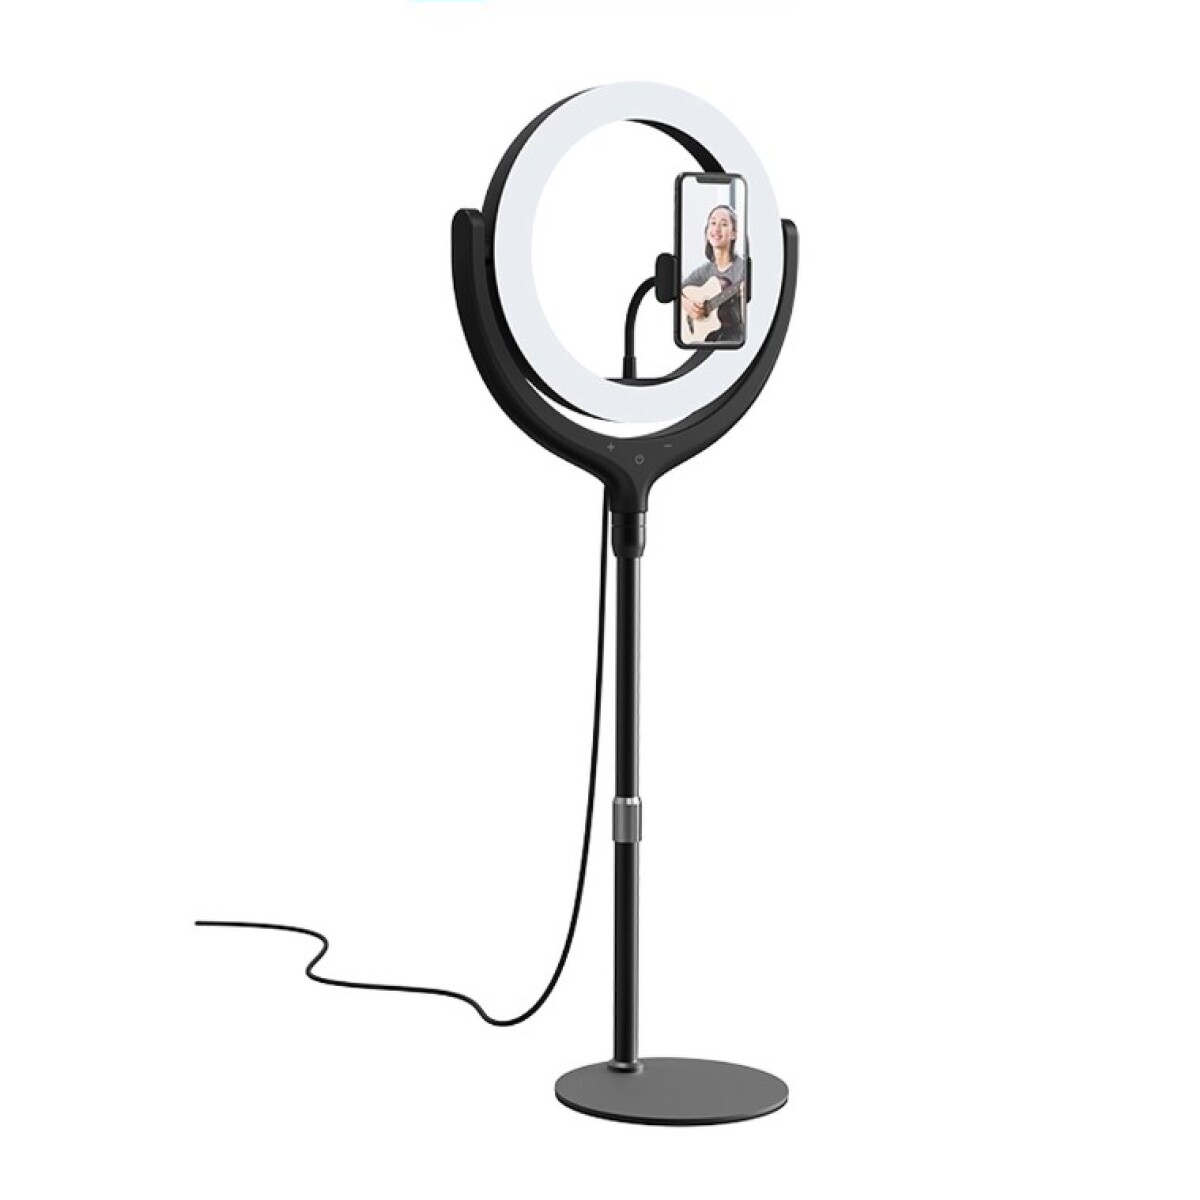 Aro de luz led 8' 40cm live streaming stand with ring light f-537a Black